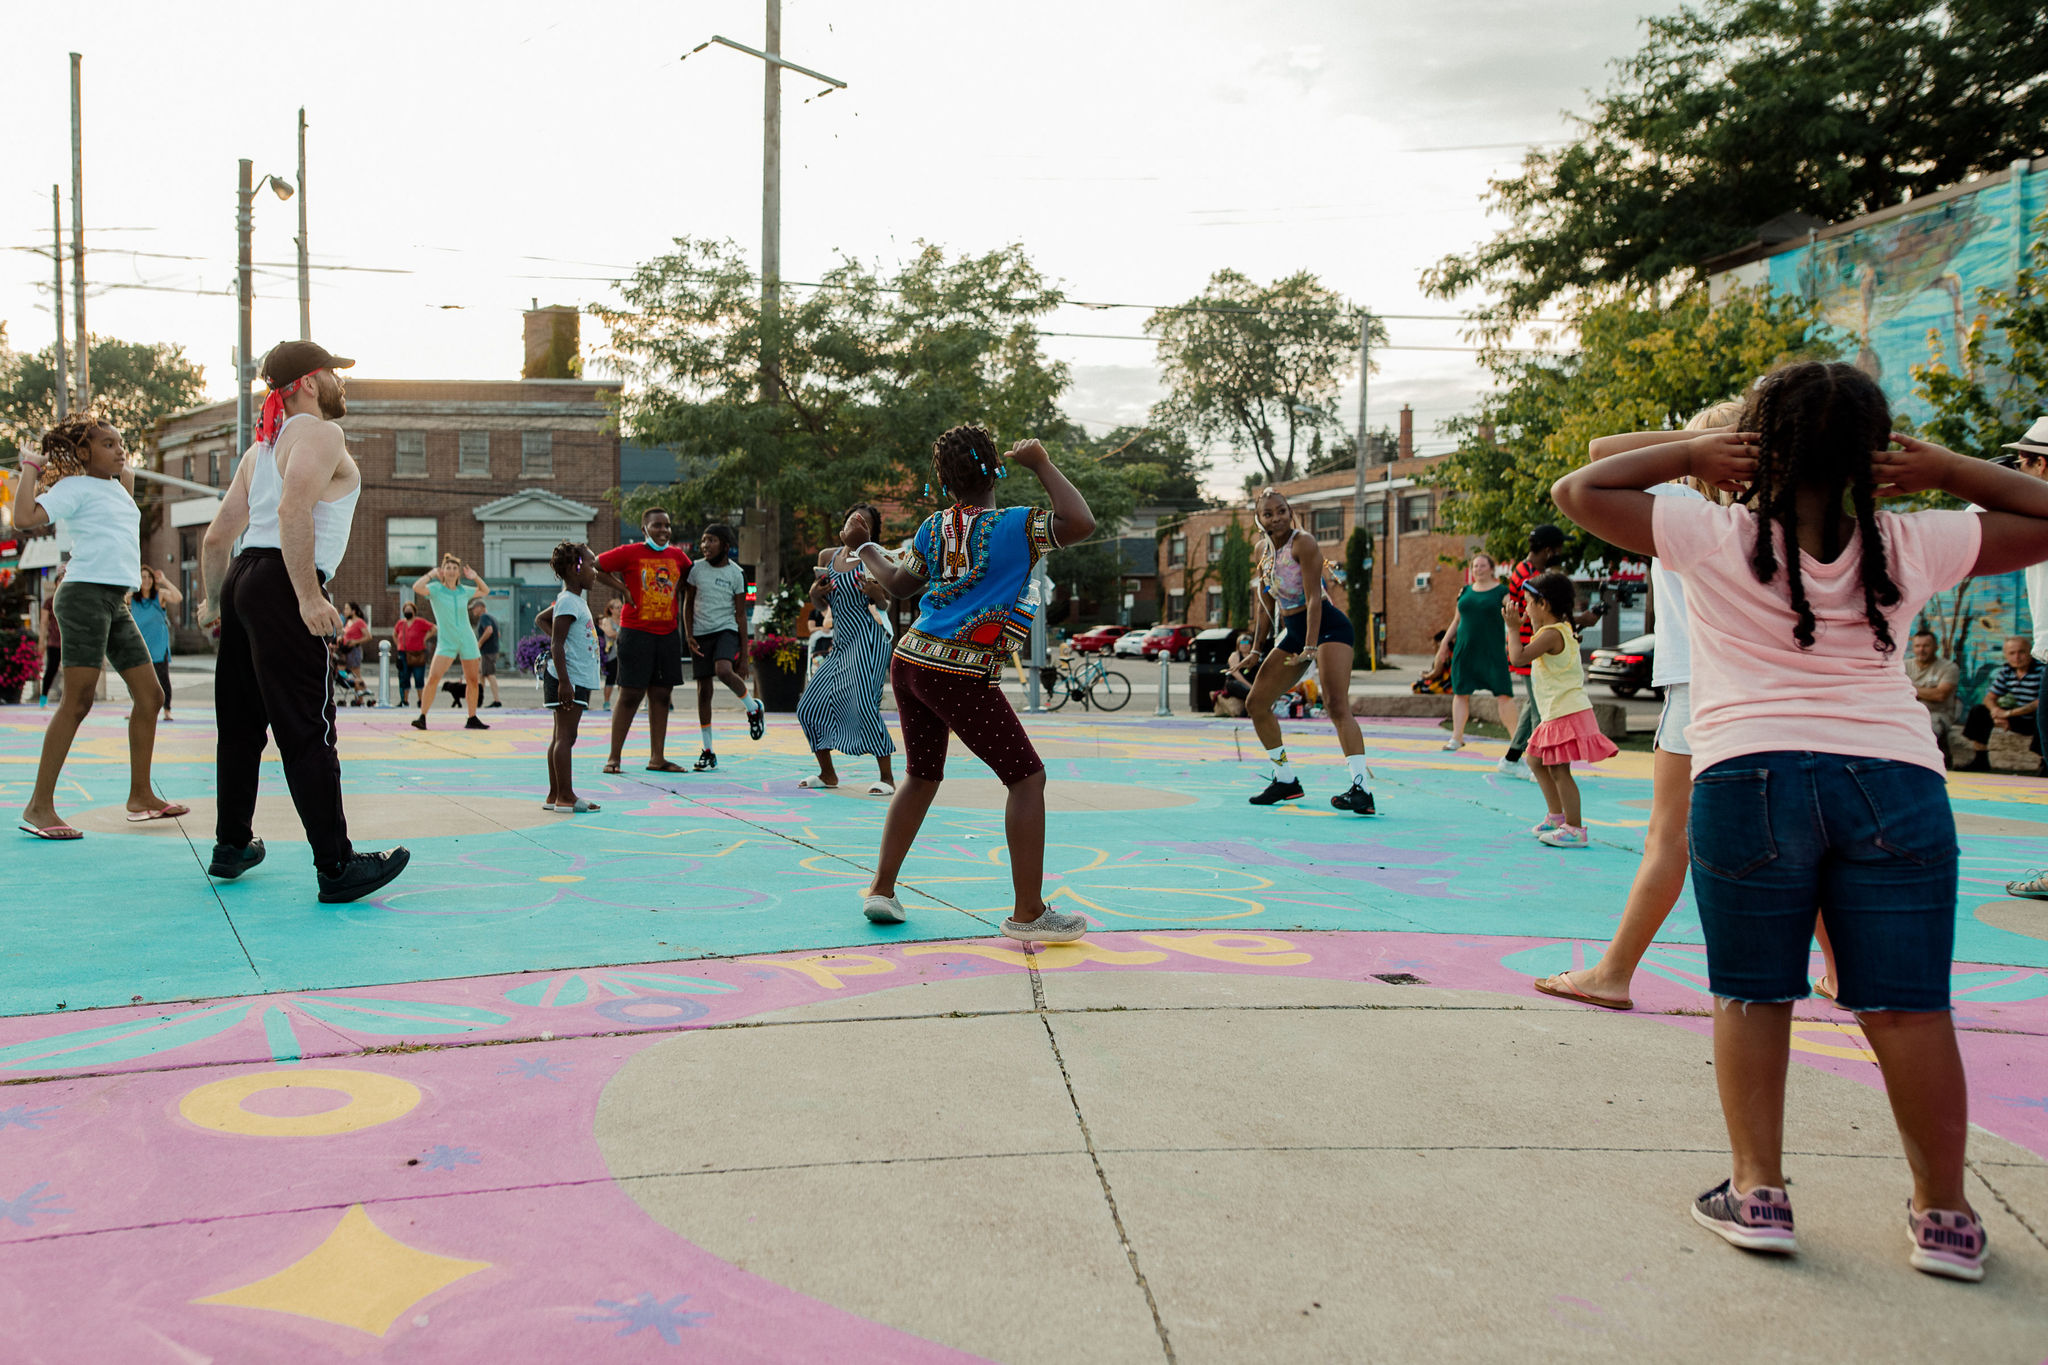 Audience members dance with their hands in the air as they participate in a workshop. They dance on brightly coloured pavement.